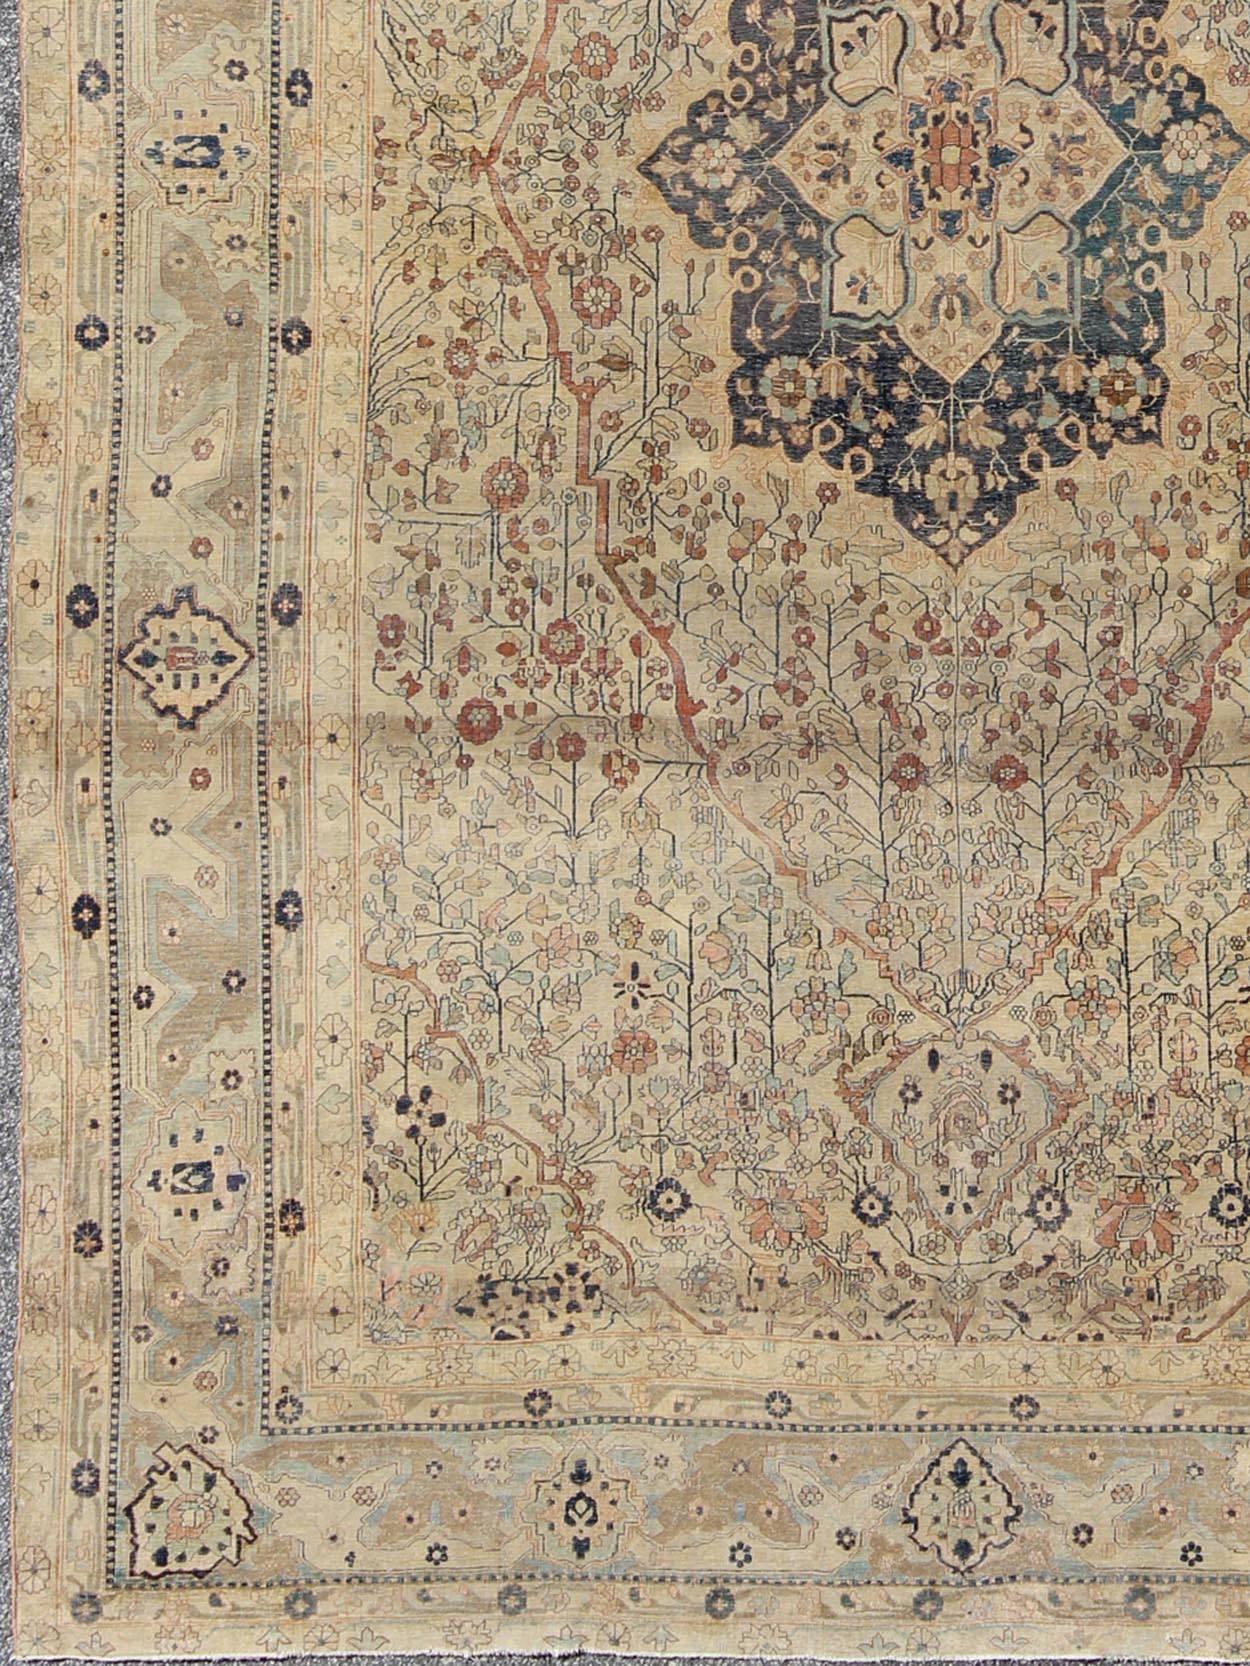 Antique 19th century Persian Mohtesham Kashan rug in cream and light blue, light green, taupe, khaki and dark blue, rug / 16-0701, 8'1 x 12'1 Antique Mohtesham Kashan Rug. Named after its master weaver and crafter, this antique Mohtasham rug is one